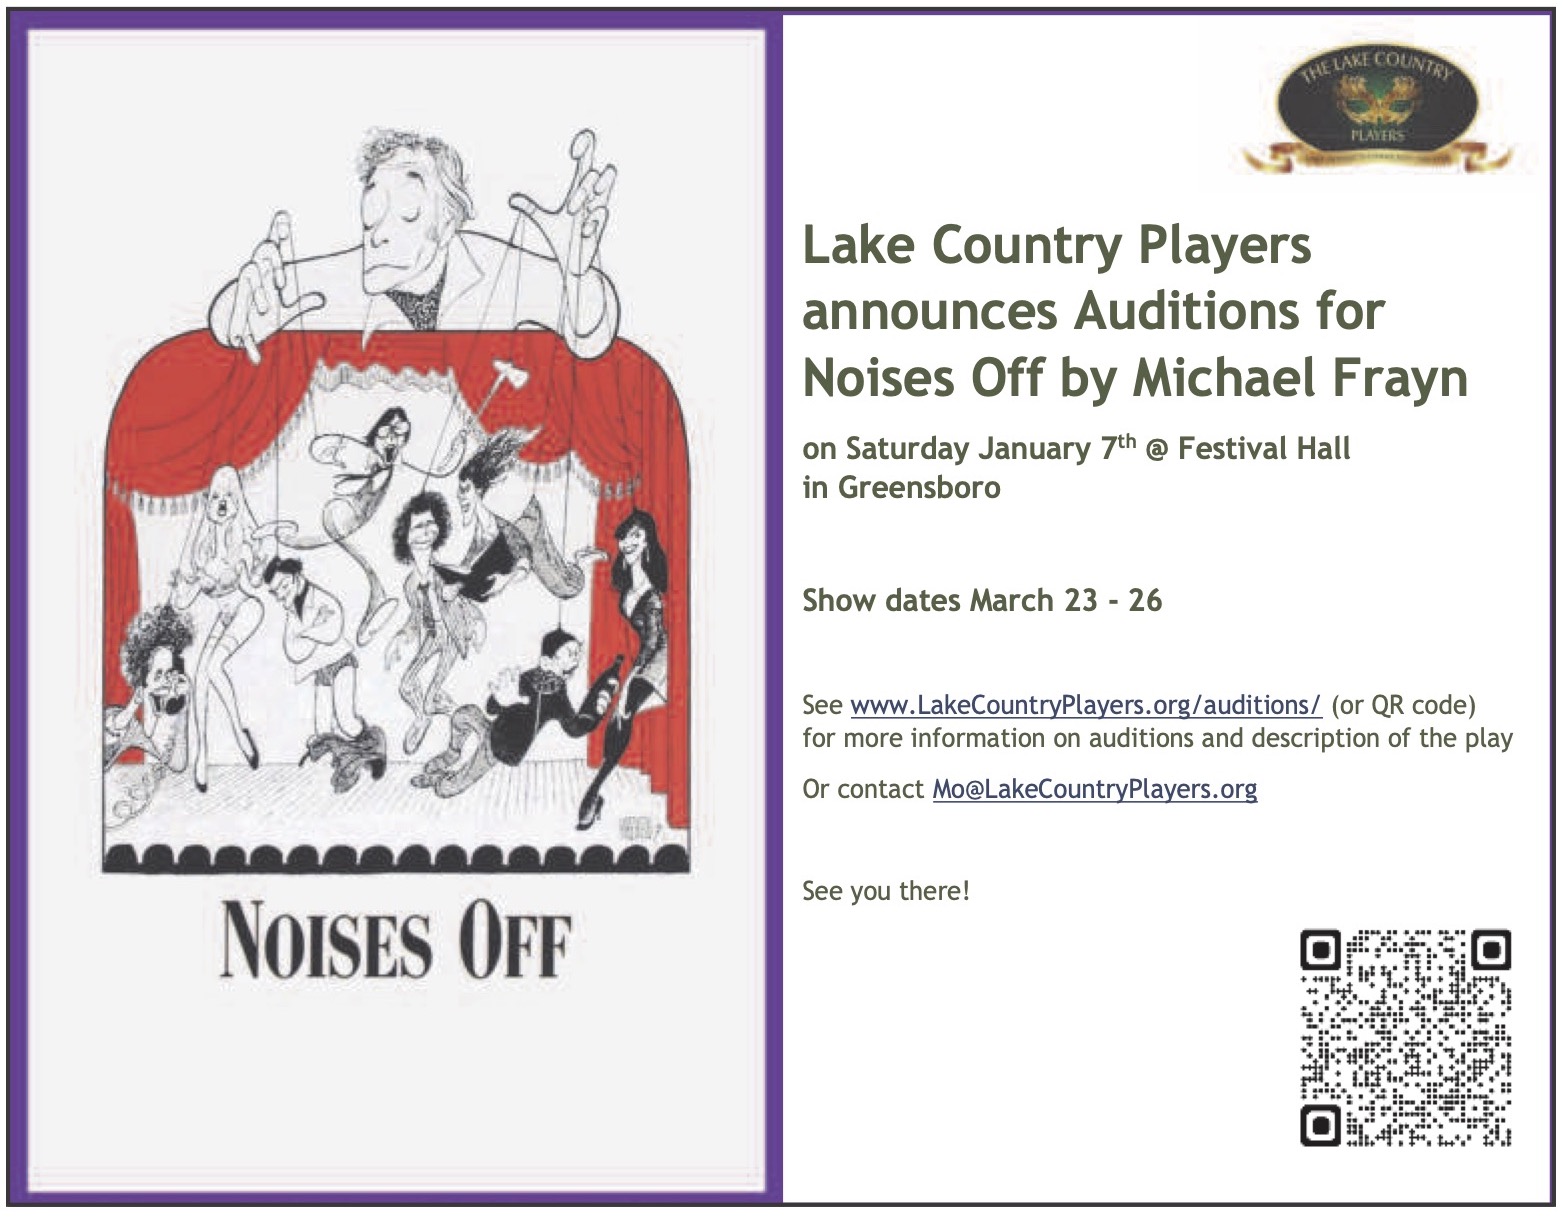 Auditions for Noises Off play